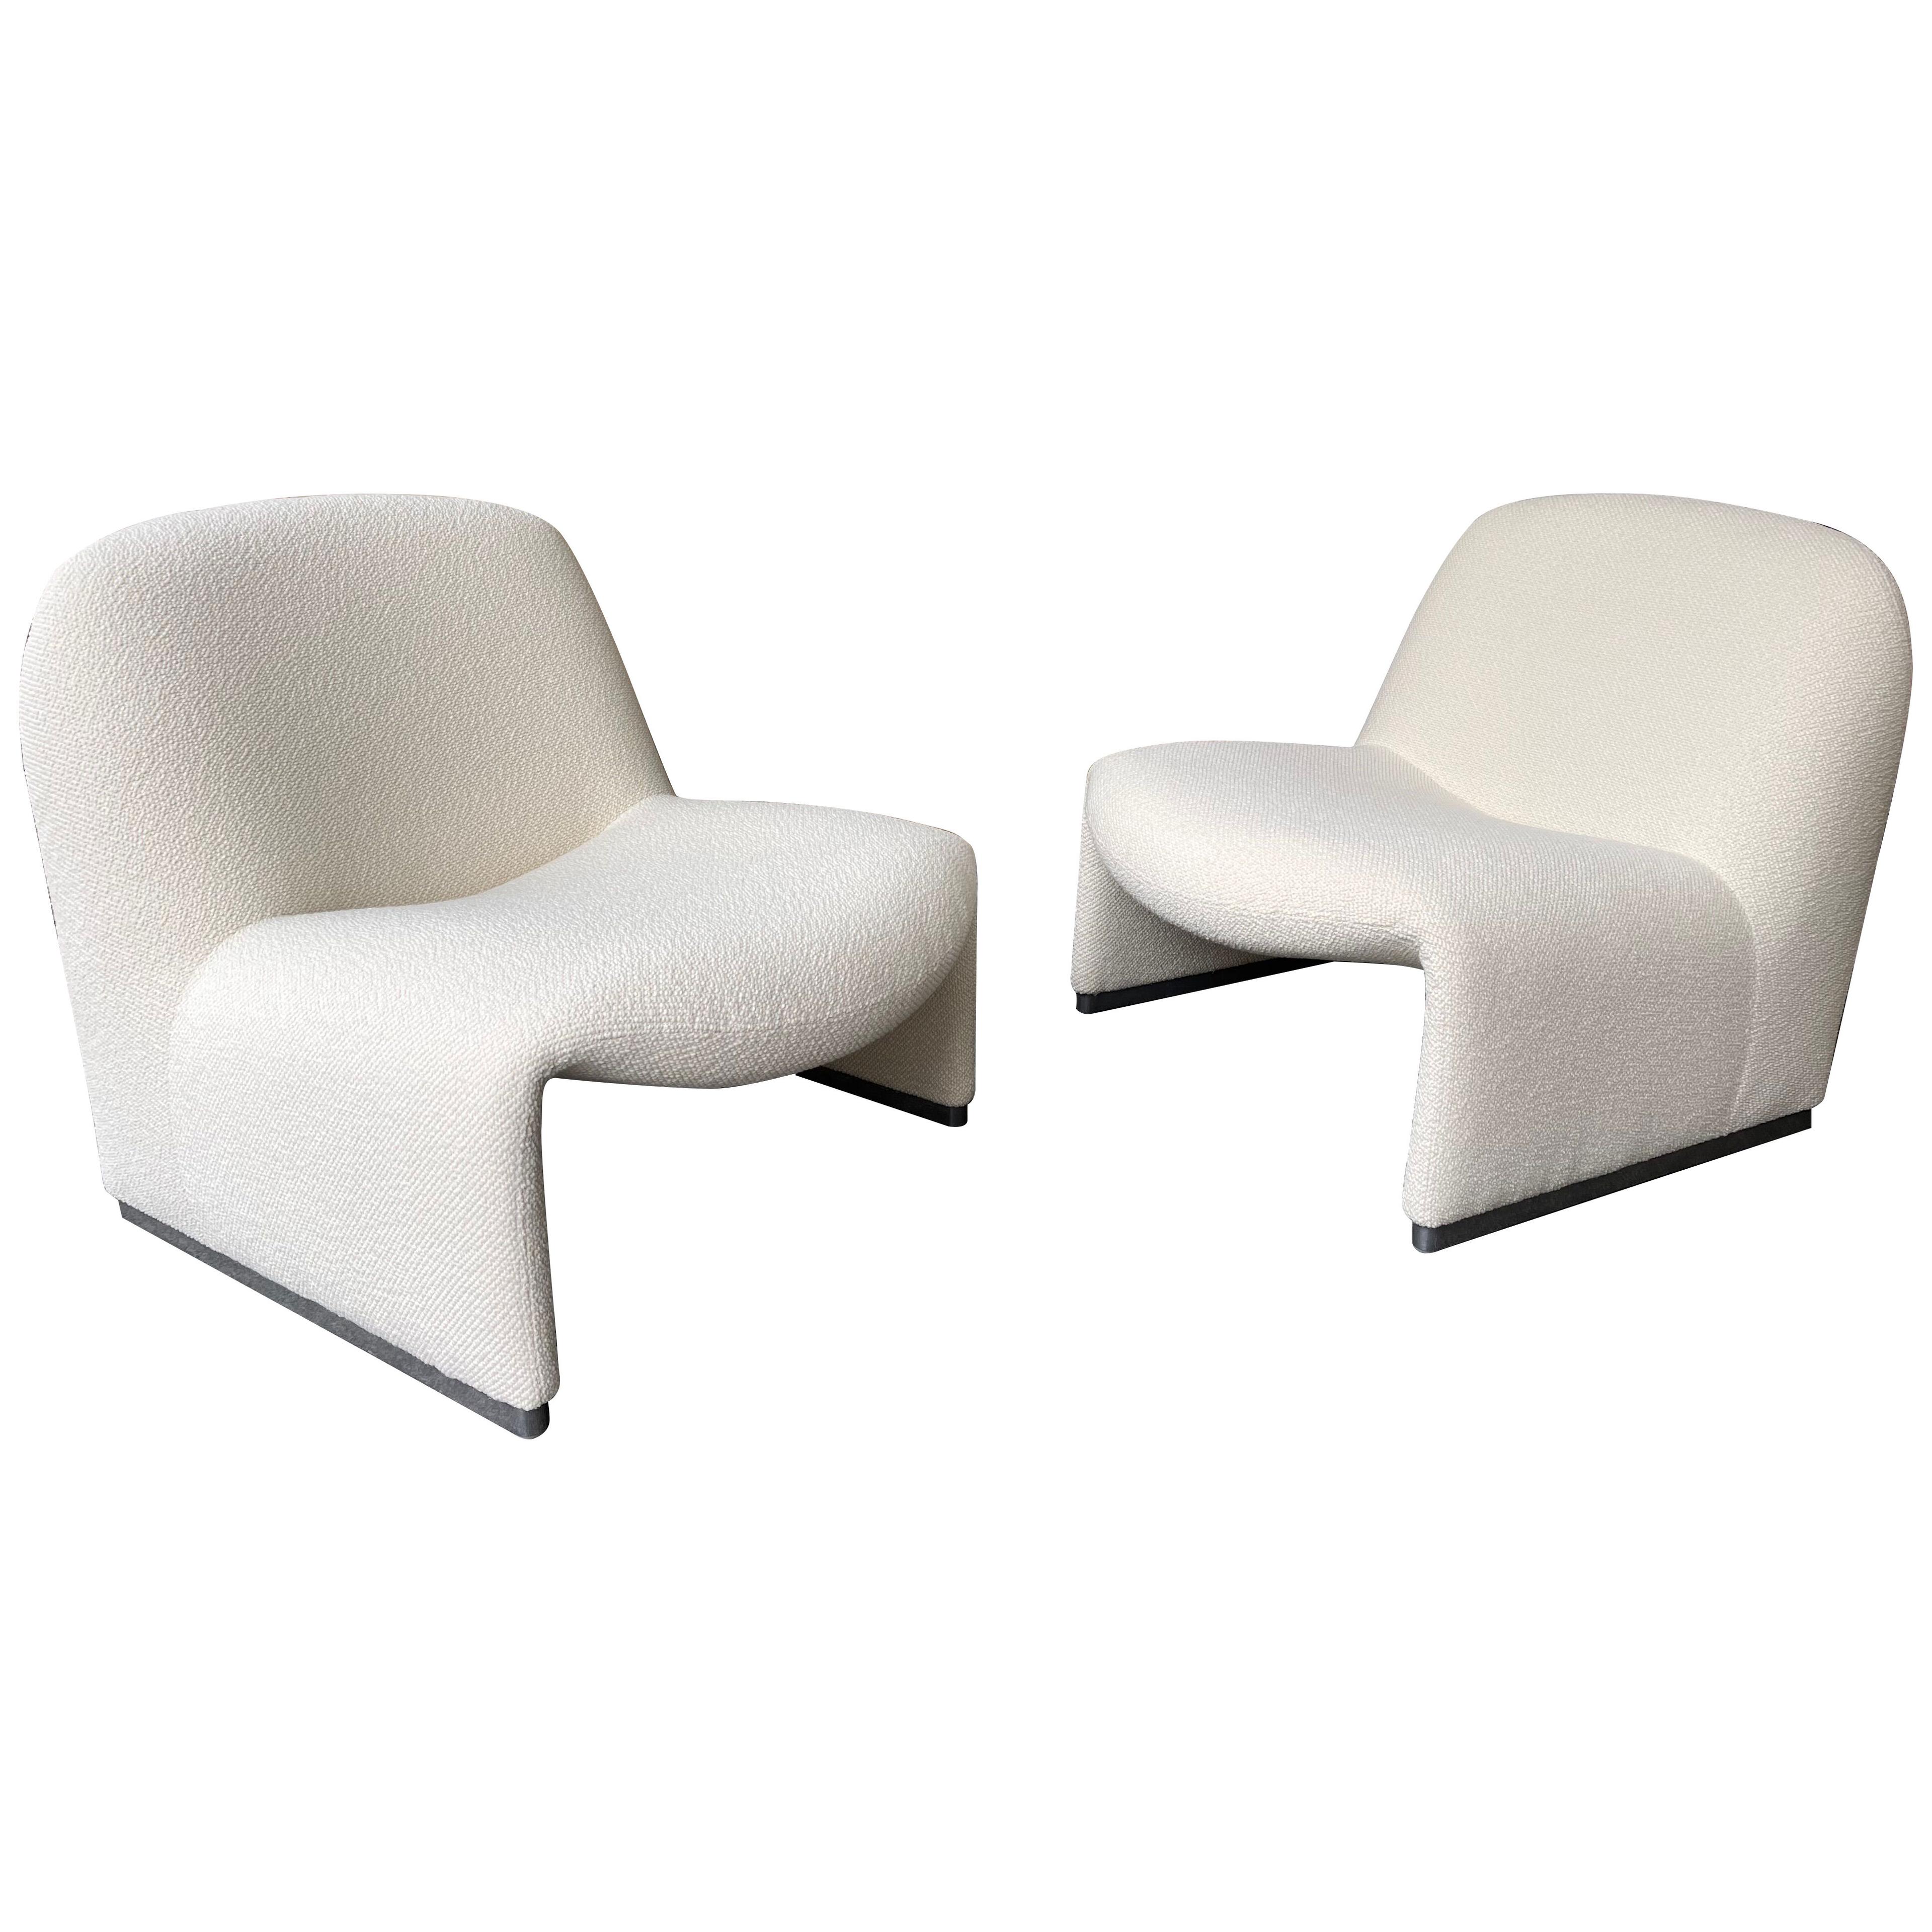 Pair of Slipper Chairs Alky Bouclé Fabric by Giancarlo Piretti. Italy, 1969